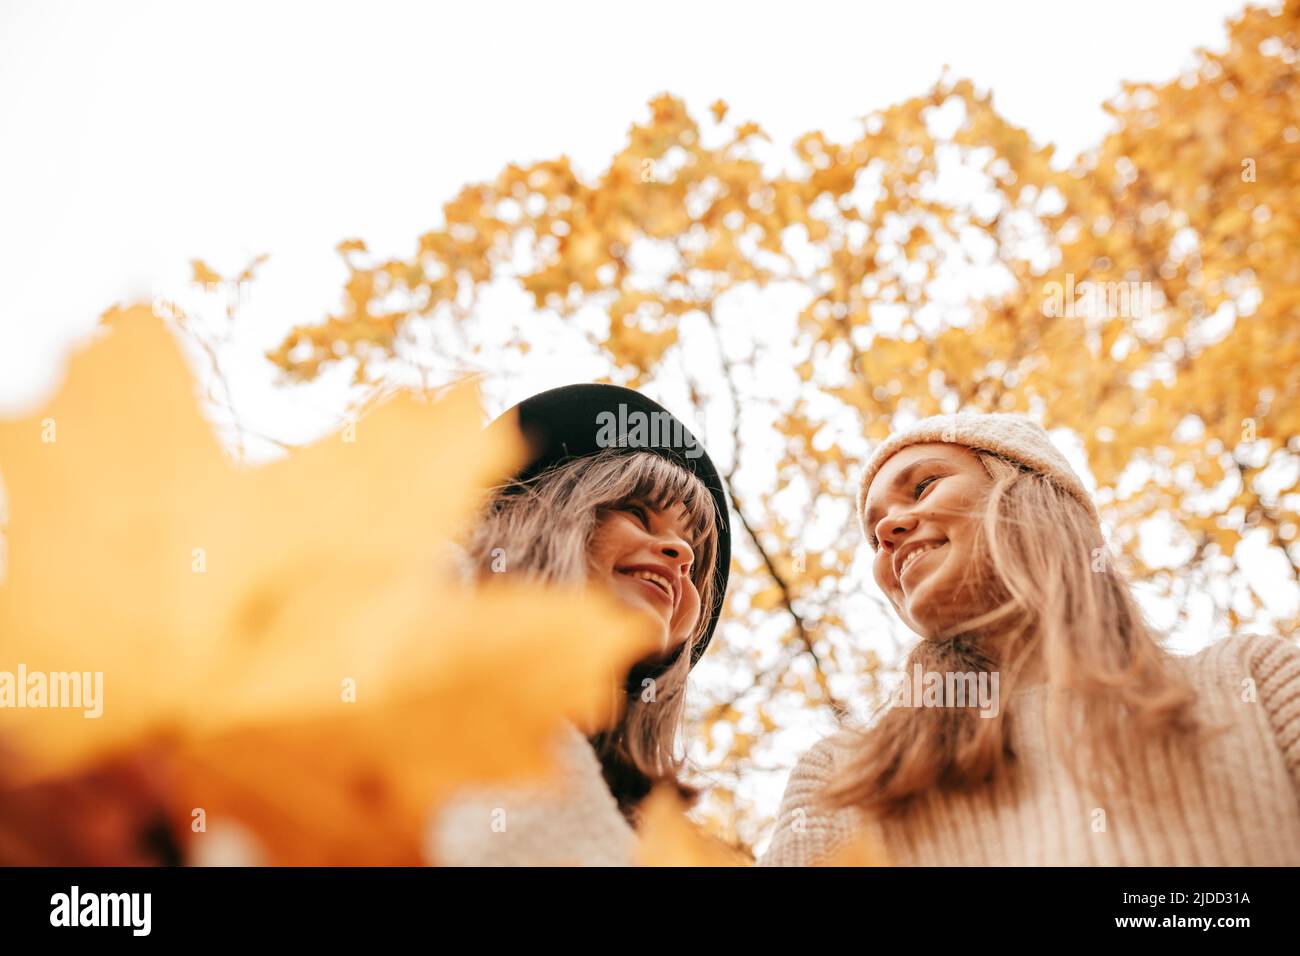 Two young happy women against background of autumn sky and yellow trees . Leaf fall. Positive emotions. Female friendship. Student times. Autumn mood Stock Photo